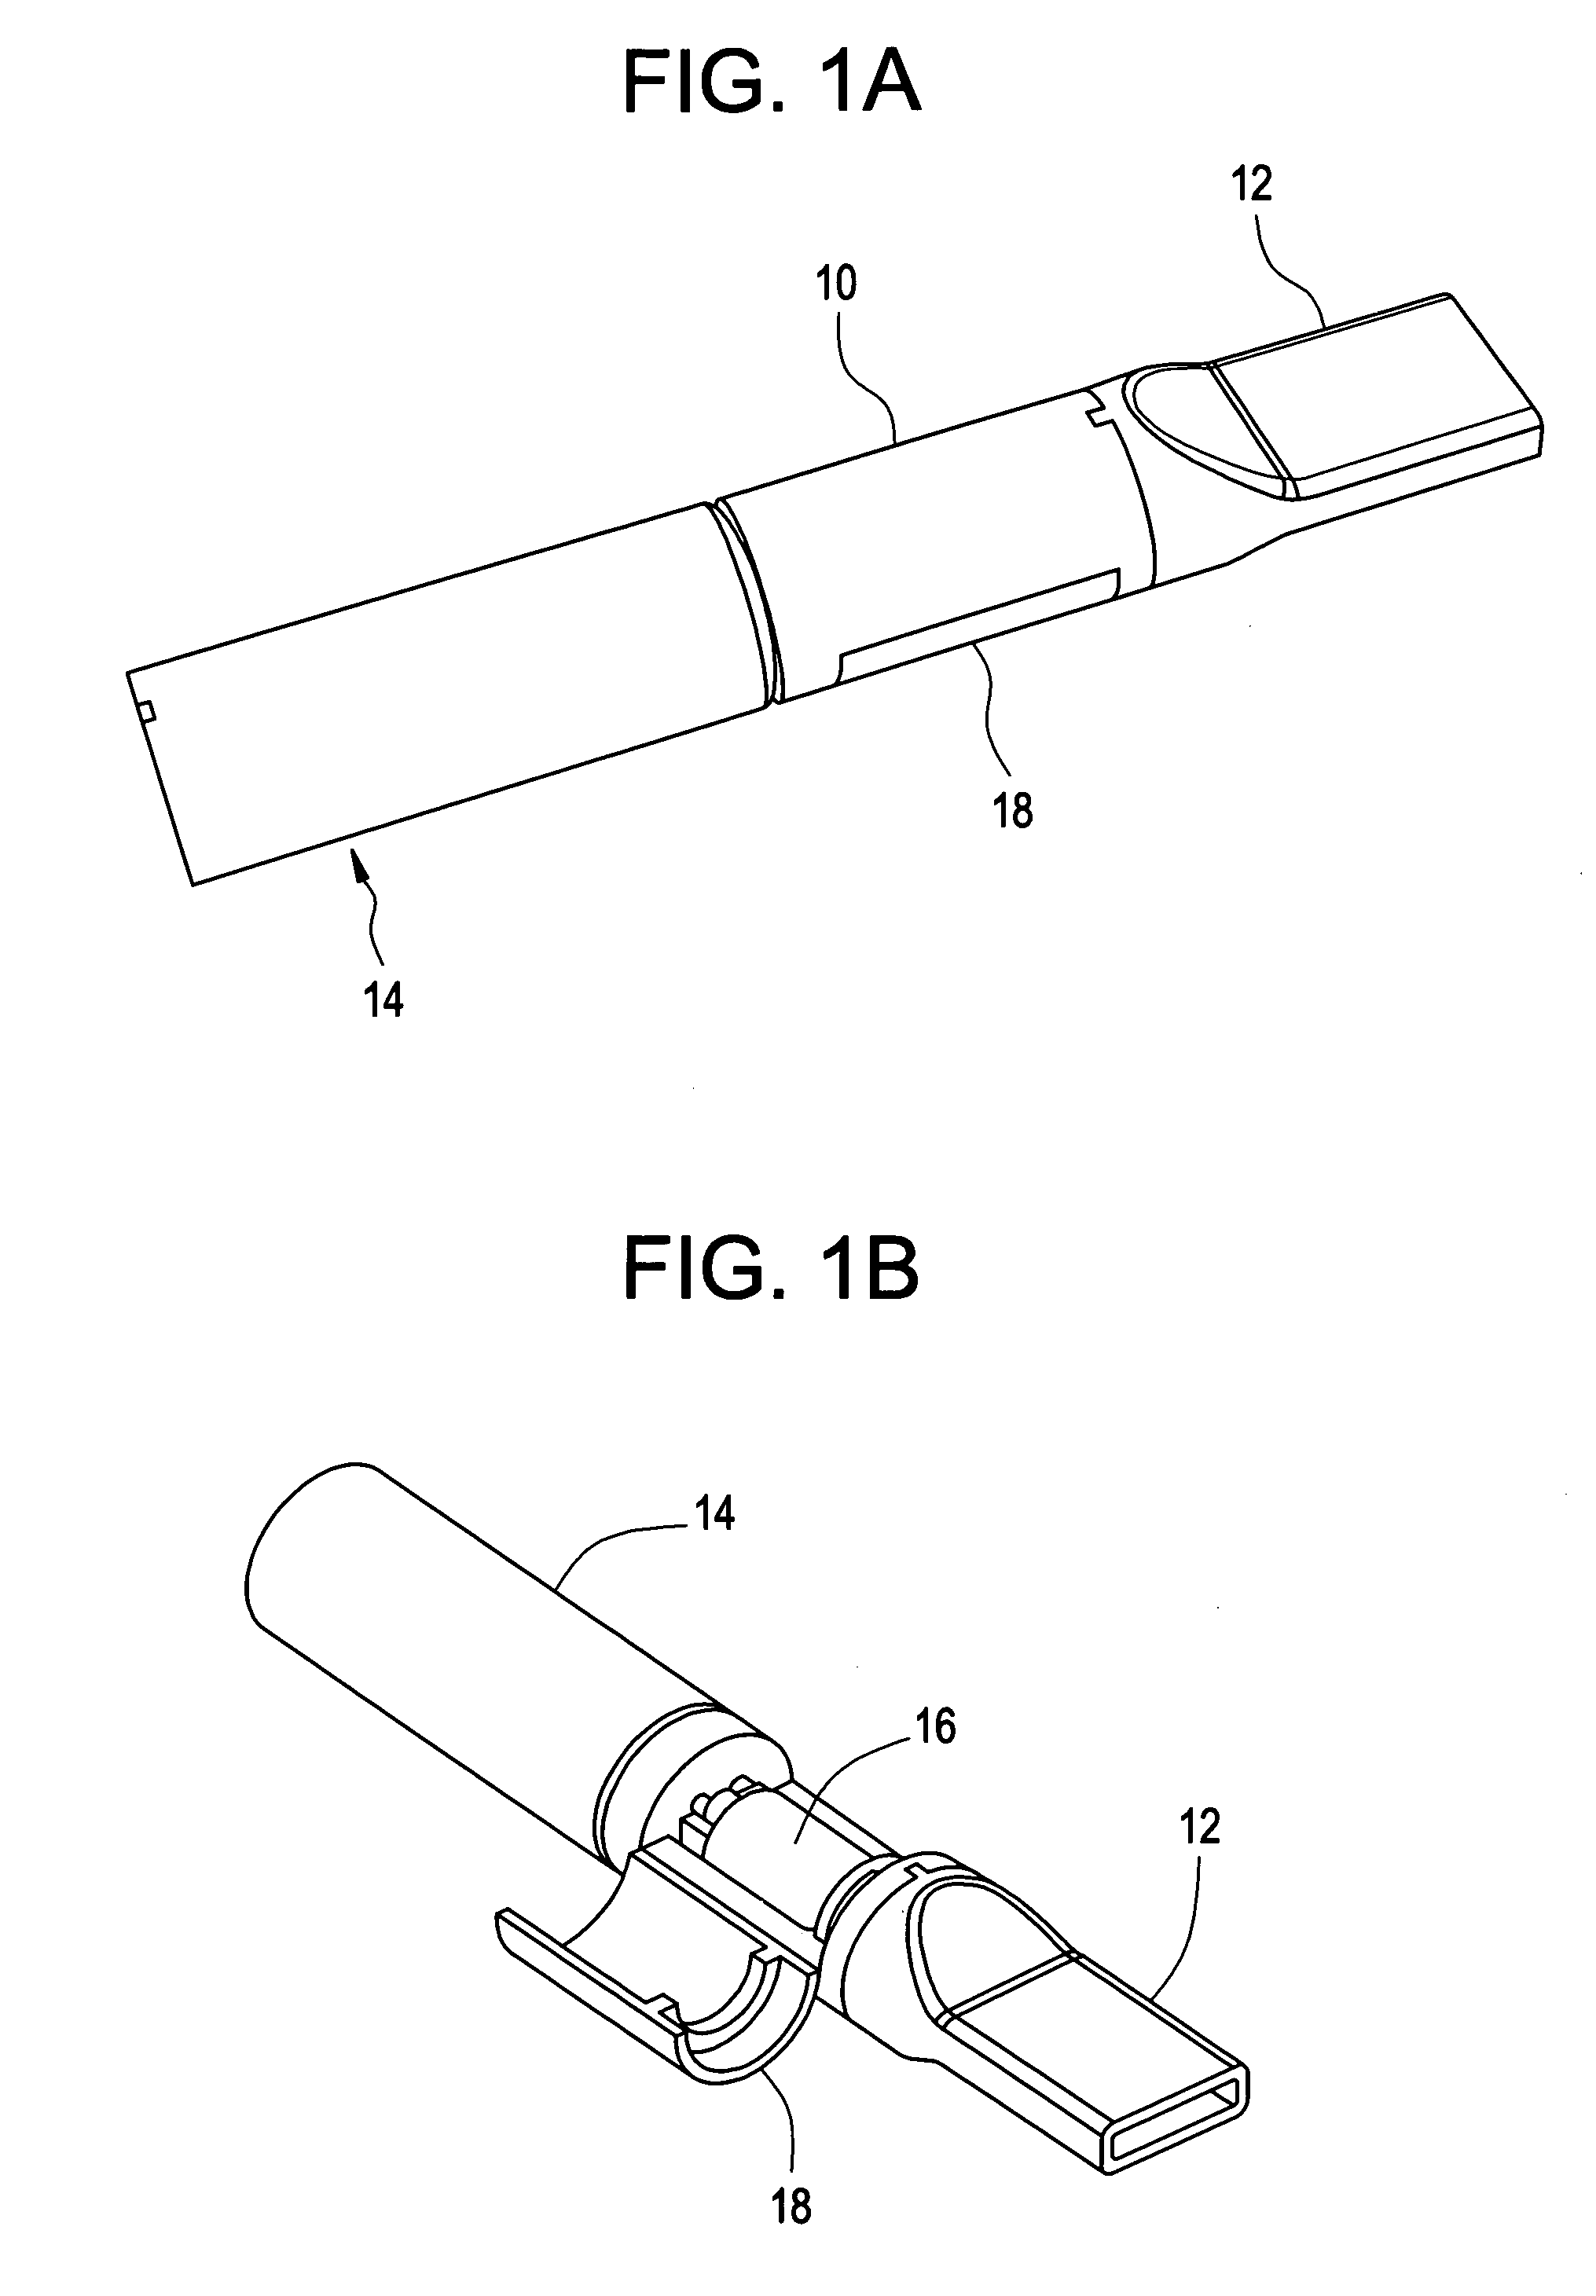 Sublingual drug delivery device